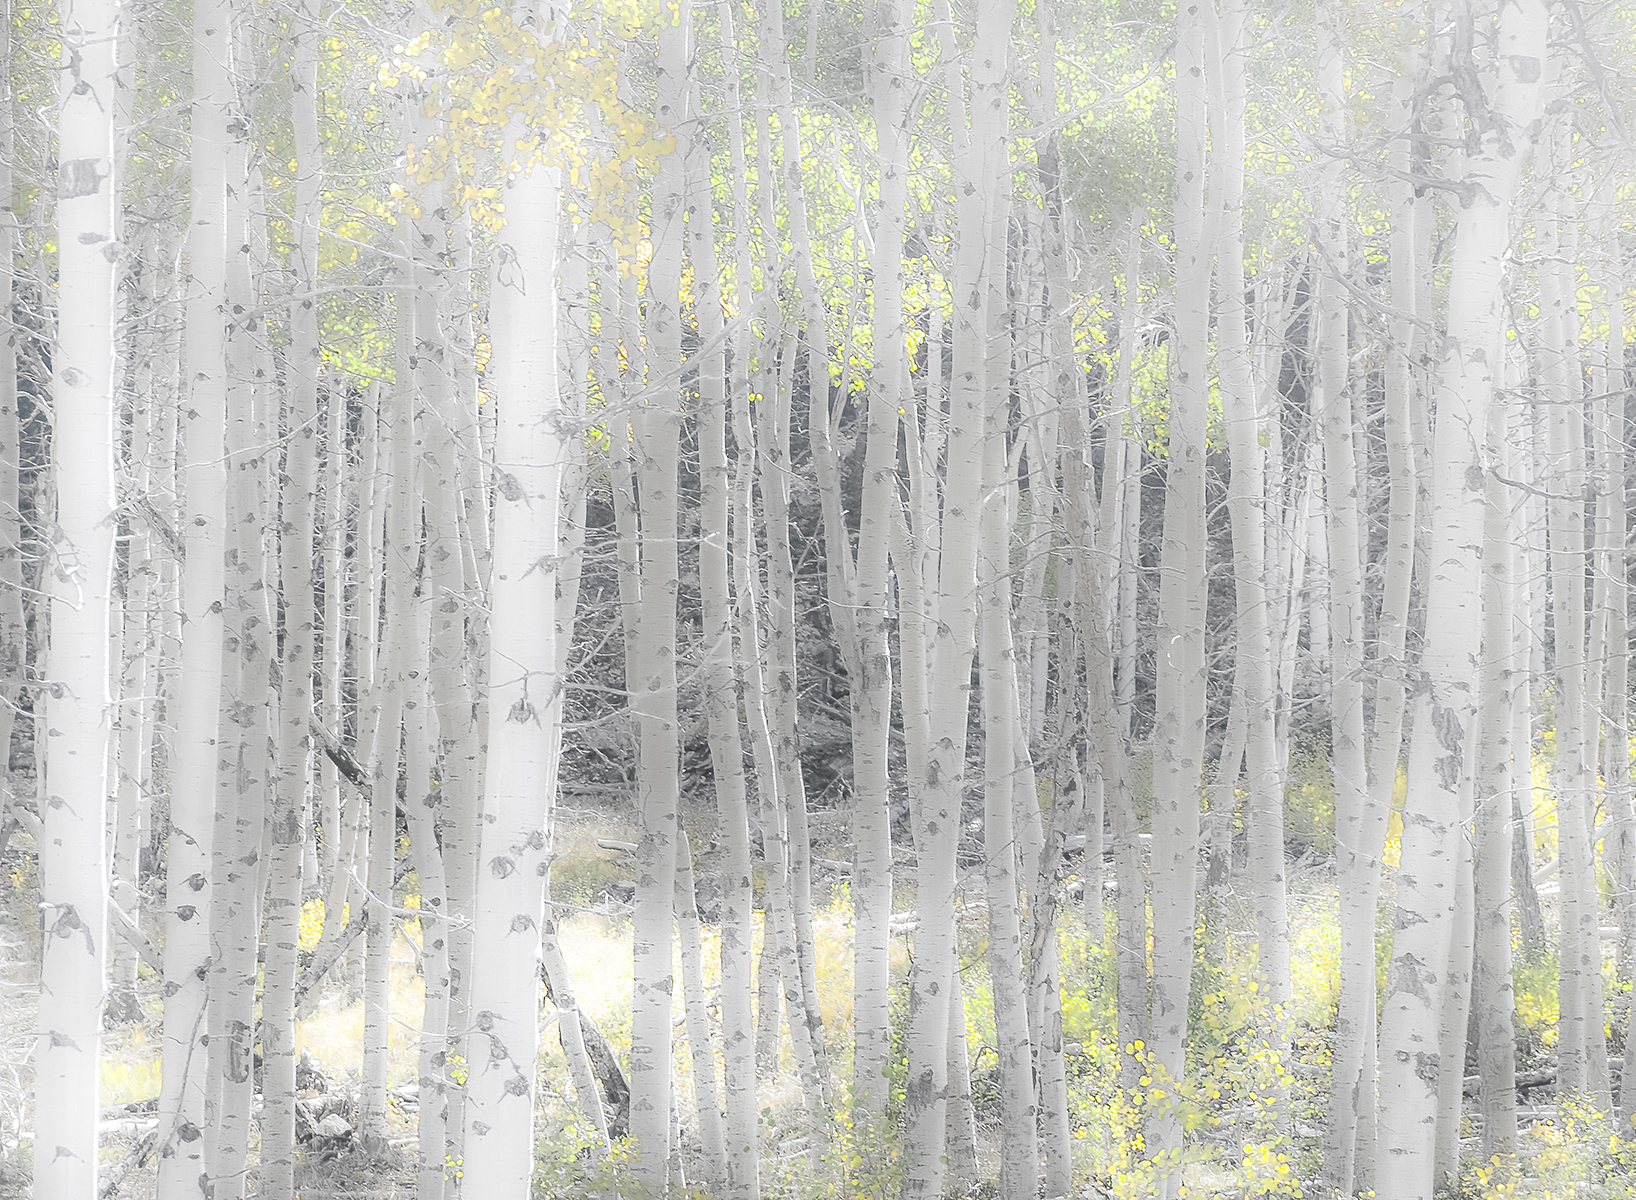 In late fall the aspen groves have an almost ethereal quality.